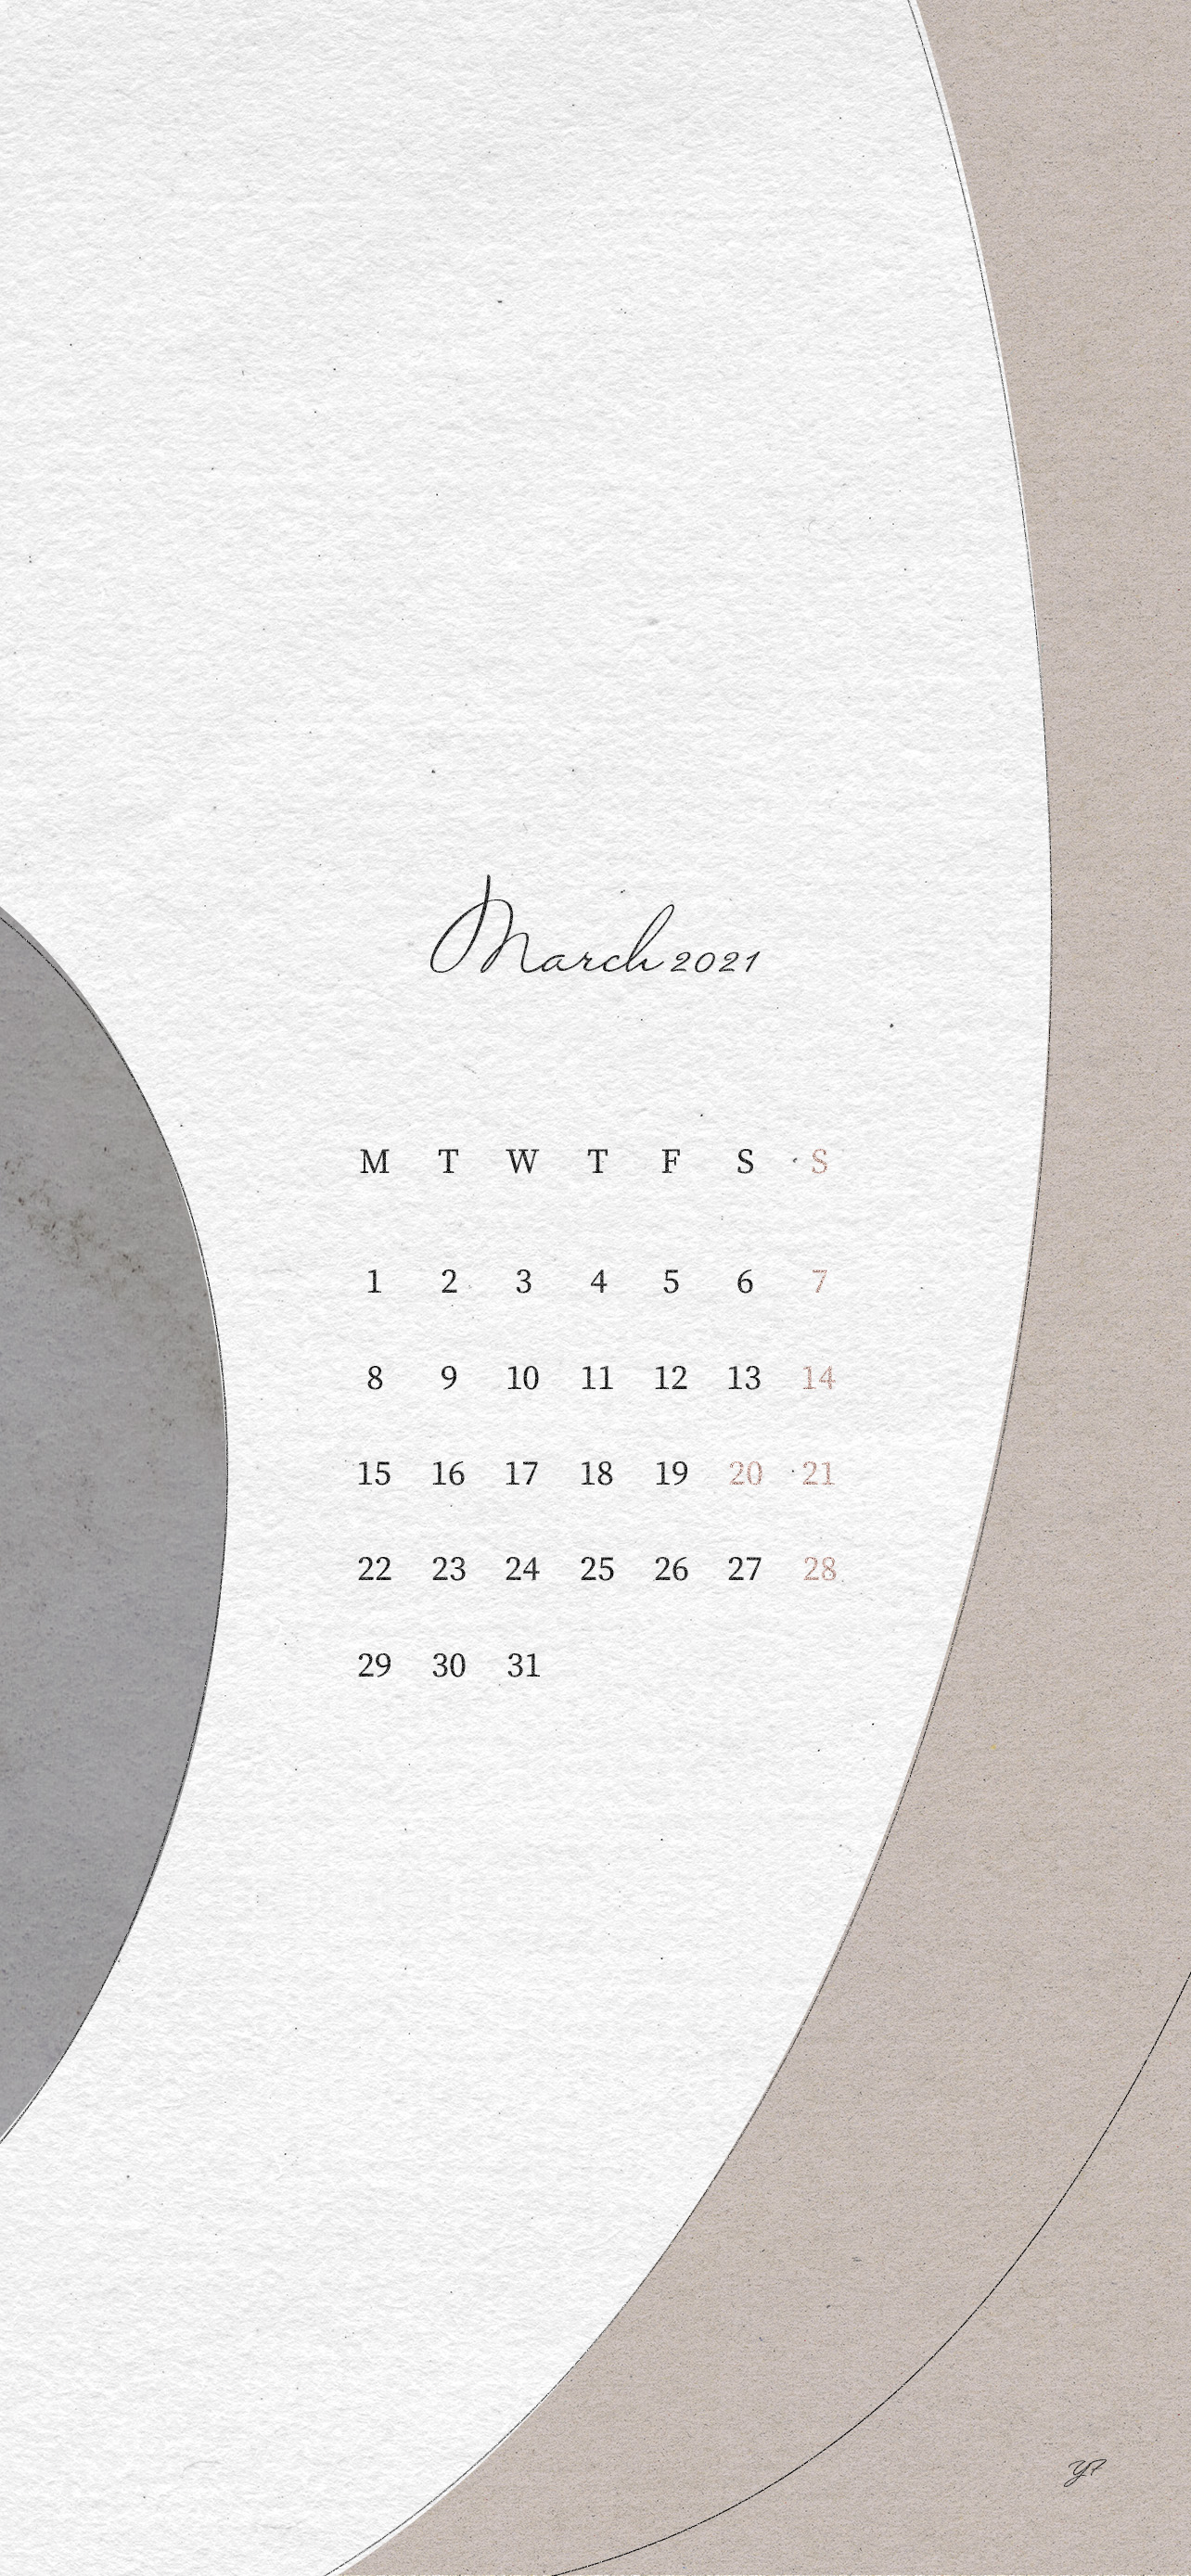 March 2021 Calendar Wallpaper For The Iphone Design By Yf